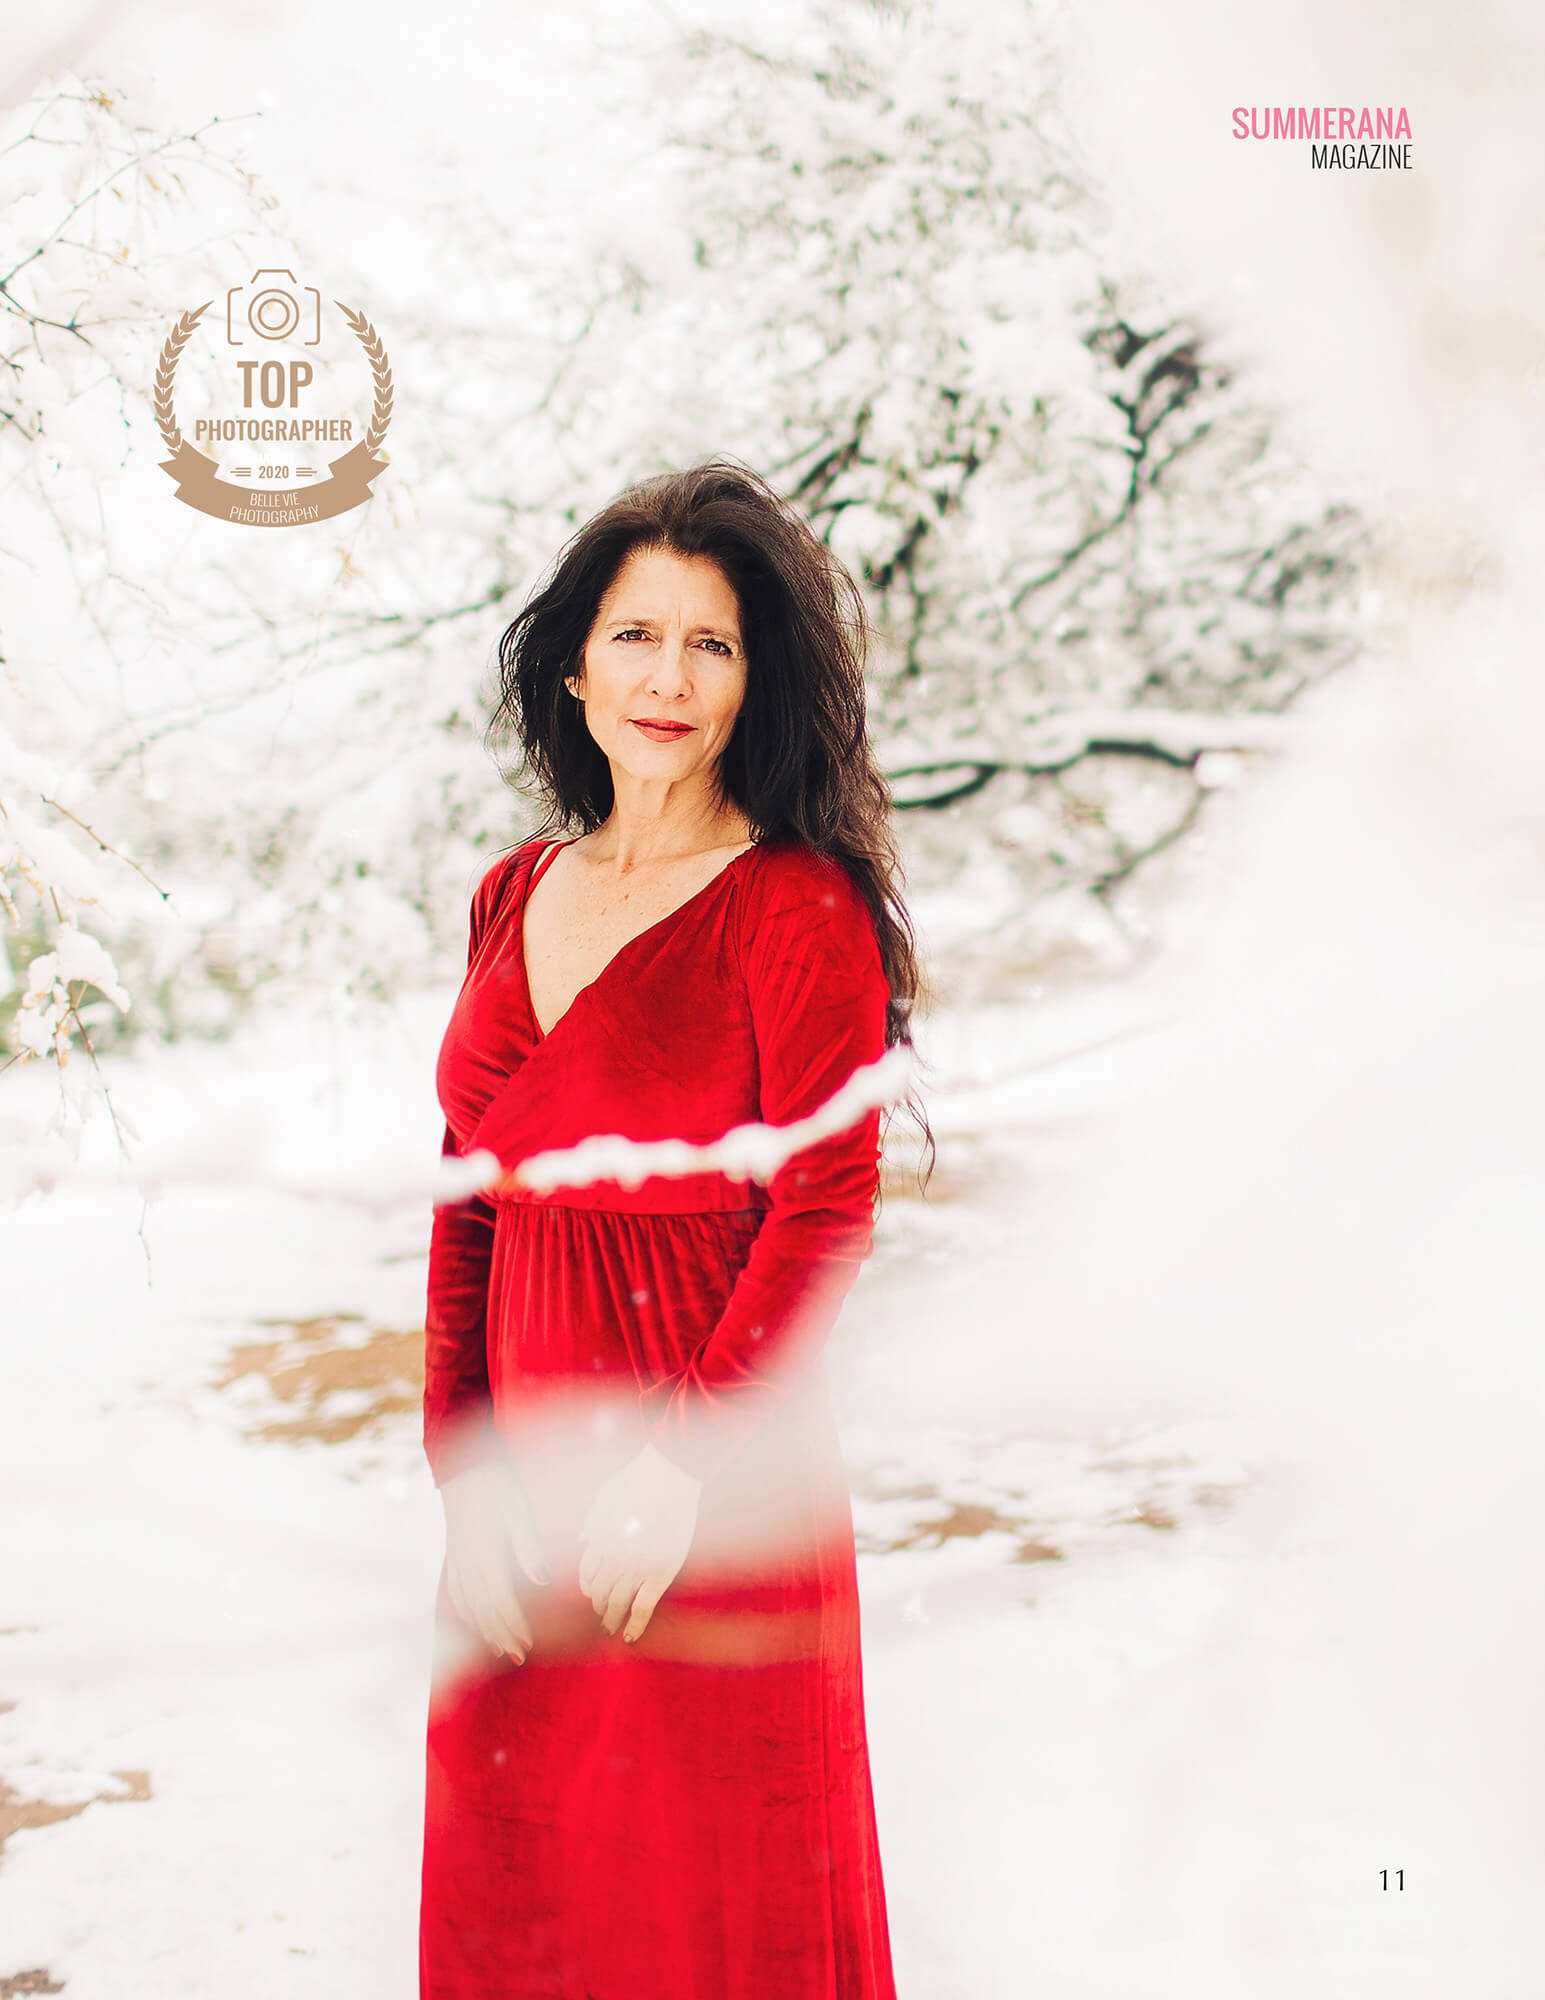 Top Photographer Summerana Magazine January 2020 a woman in the snow in a red dress